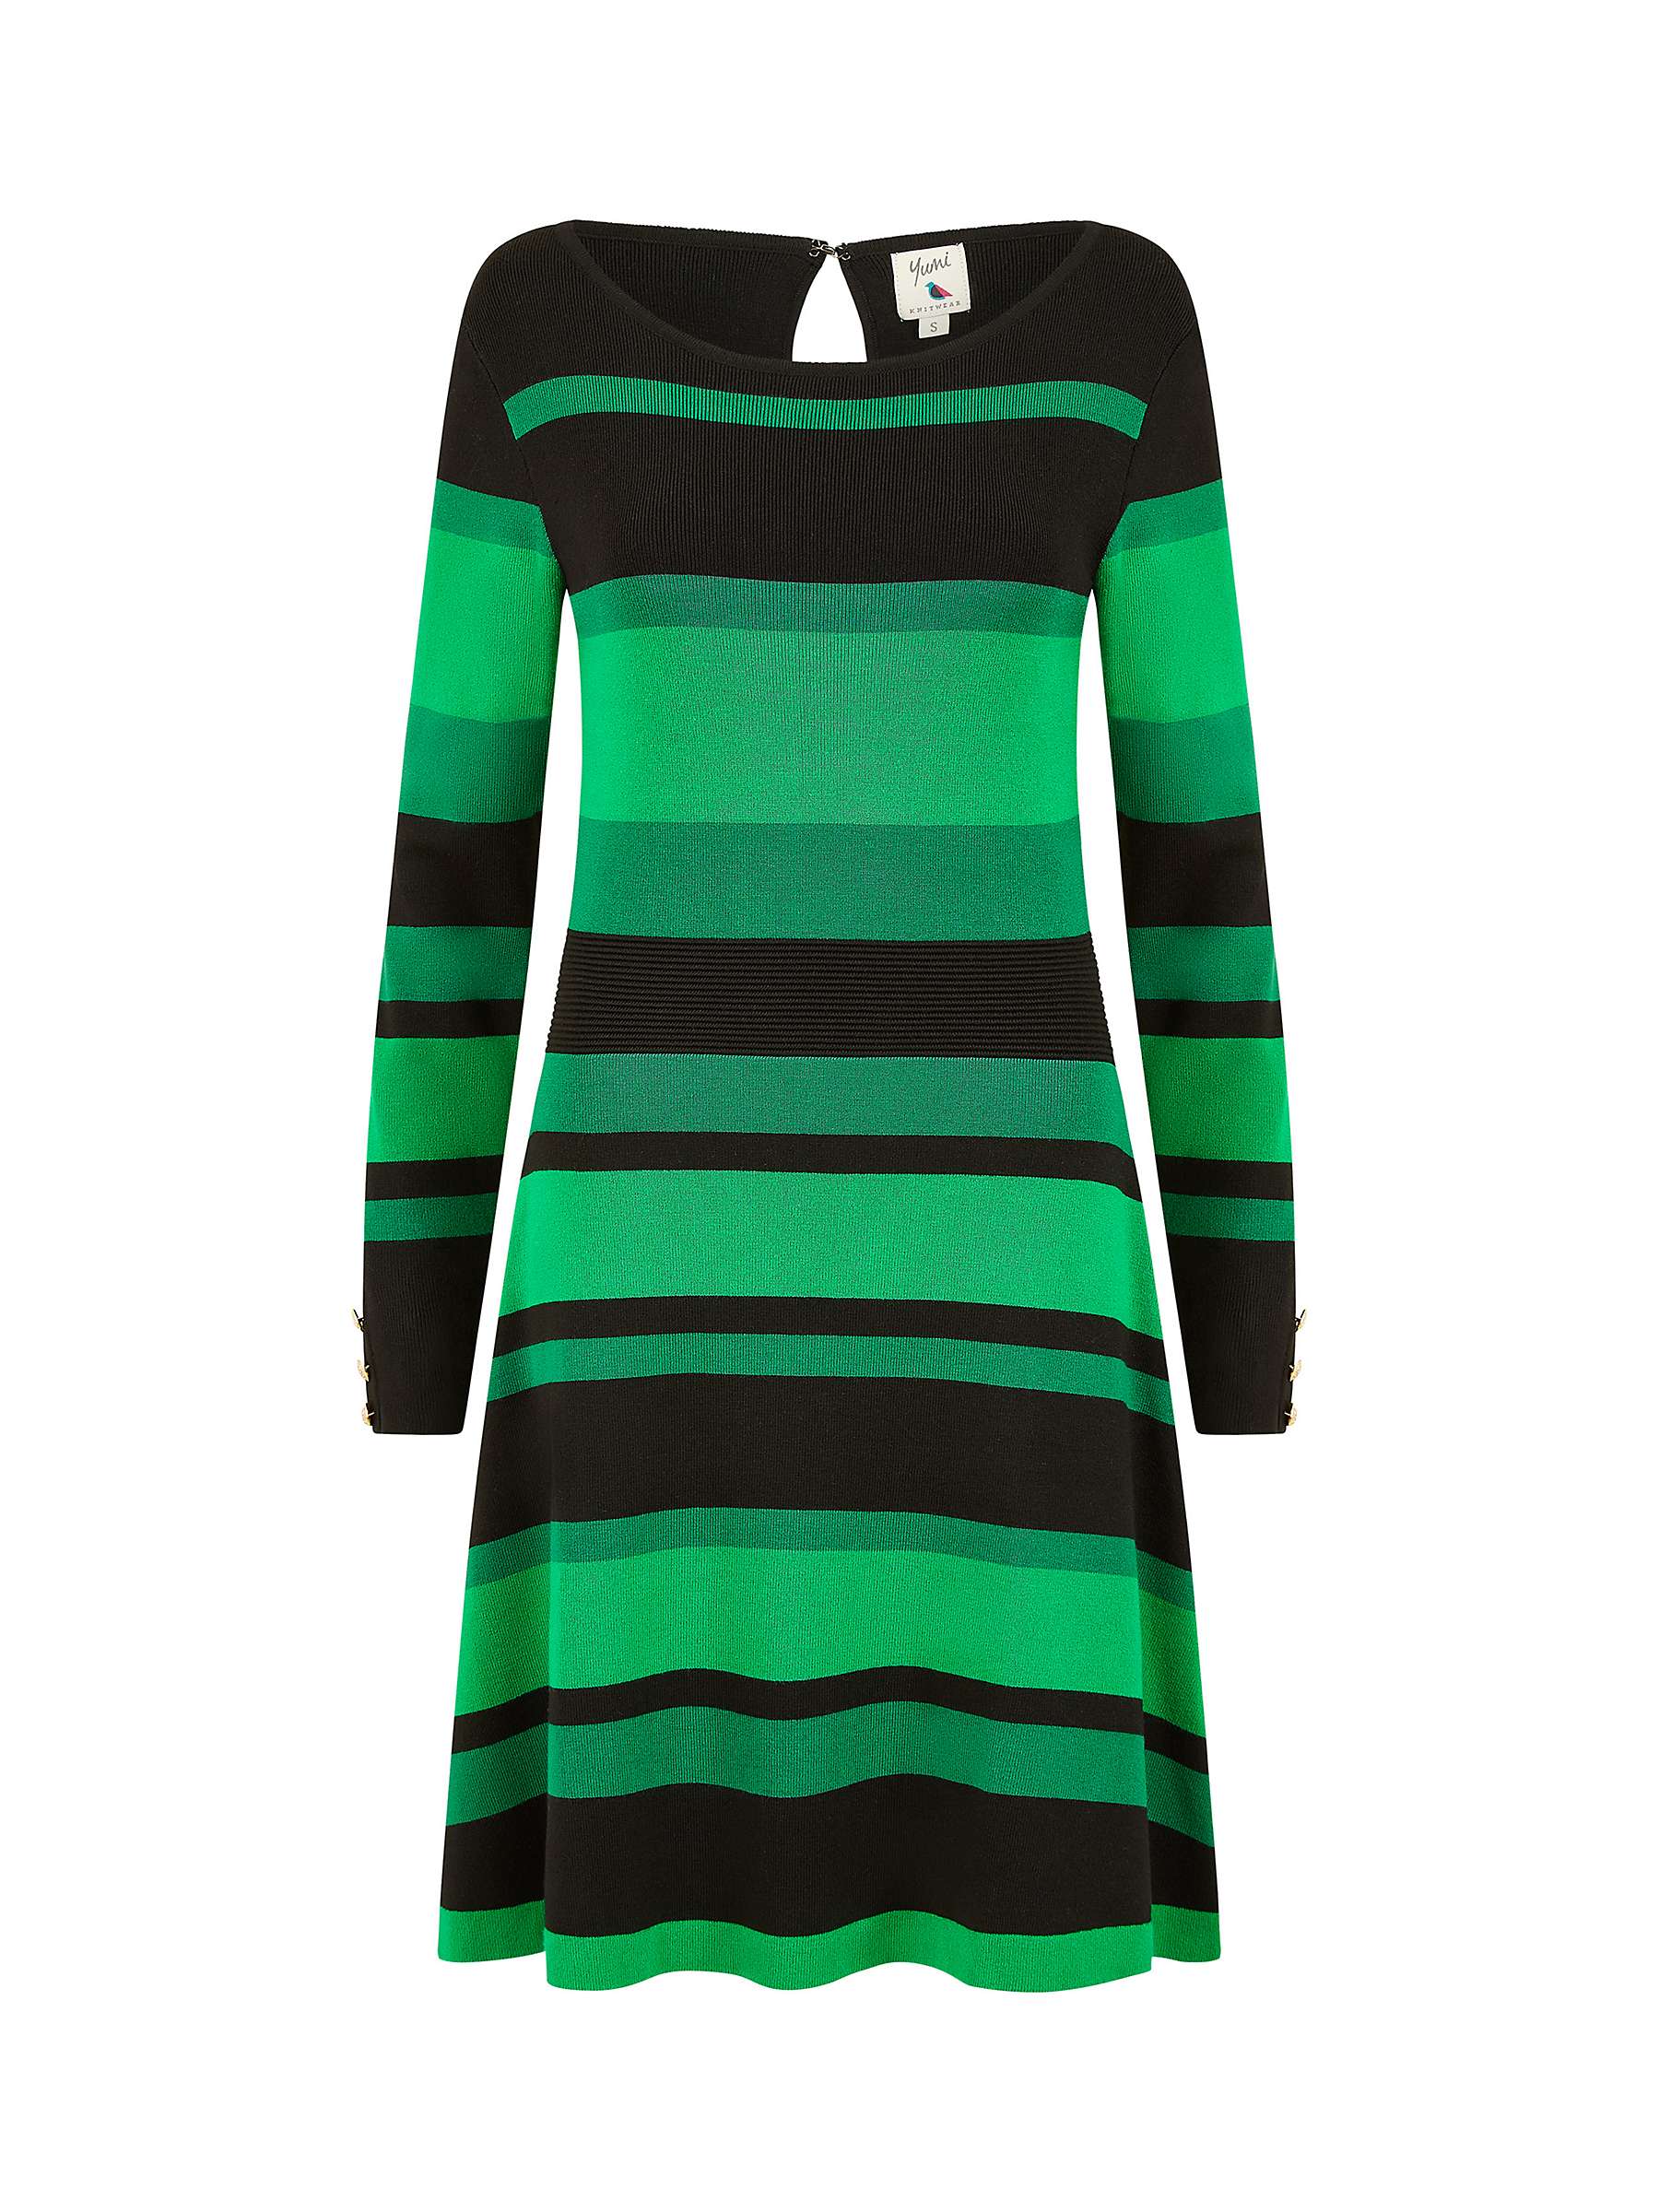 Buy Yumi Striped Knitted Skater Dress, Green Online at johnlewis.com